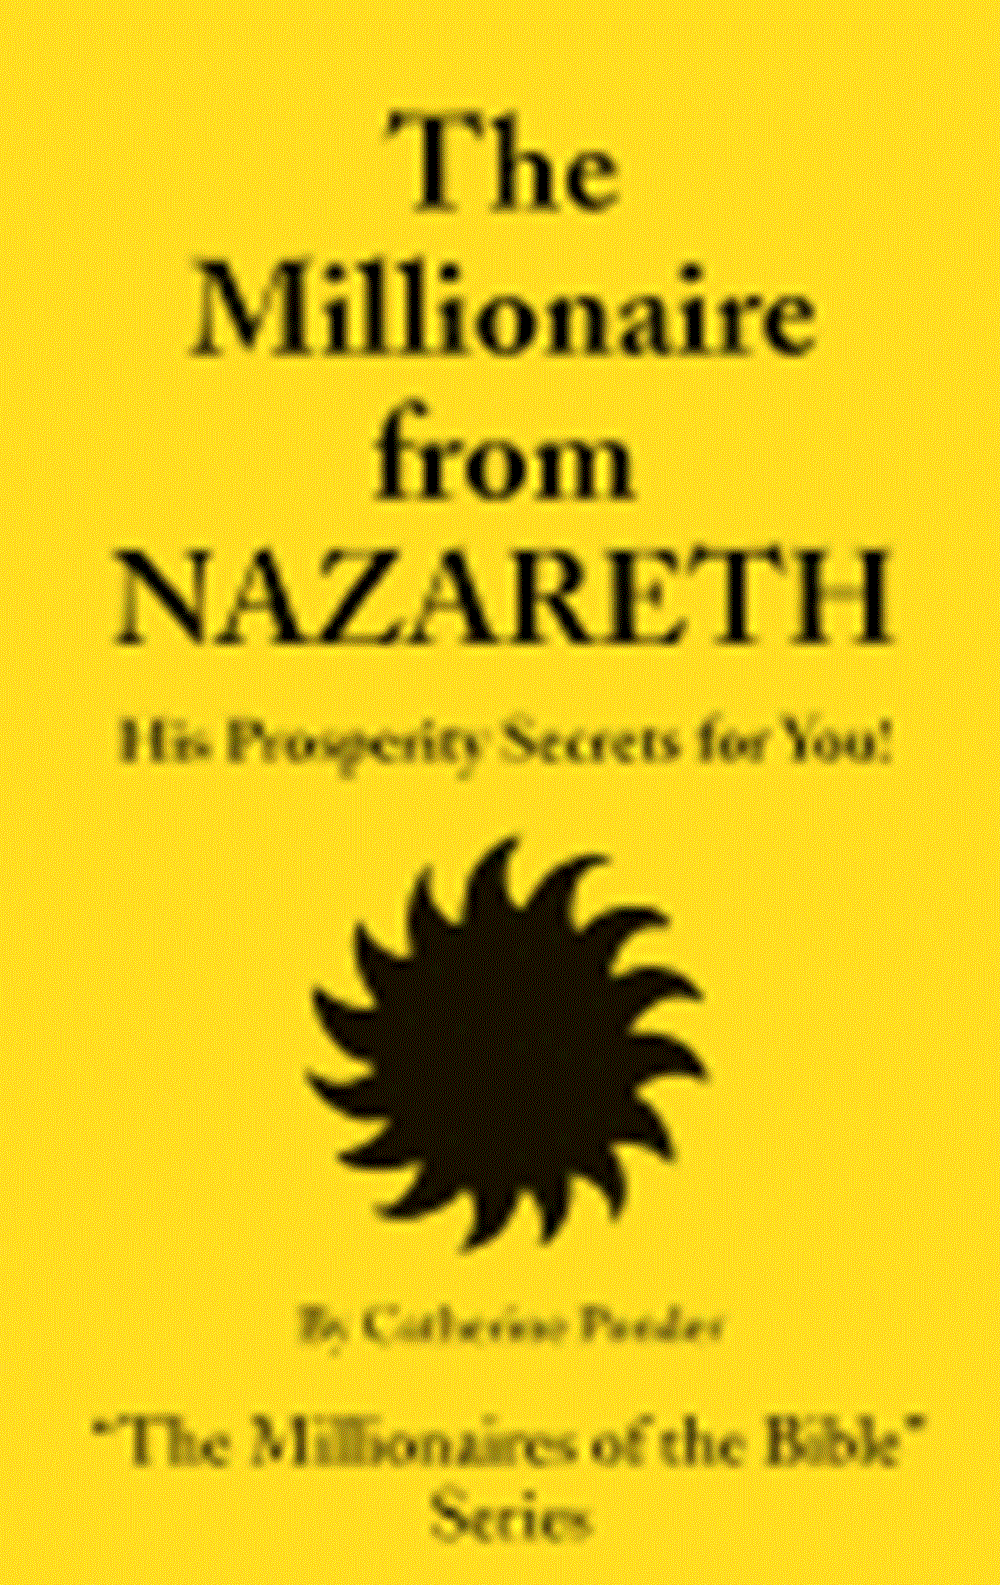 Millionaire from Nazareth His Prosperity Secrets for You! (Revised)